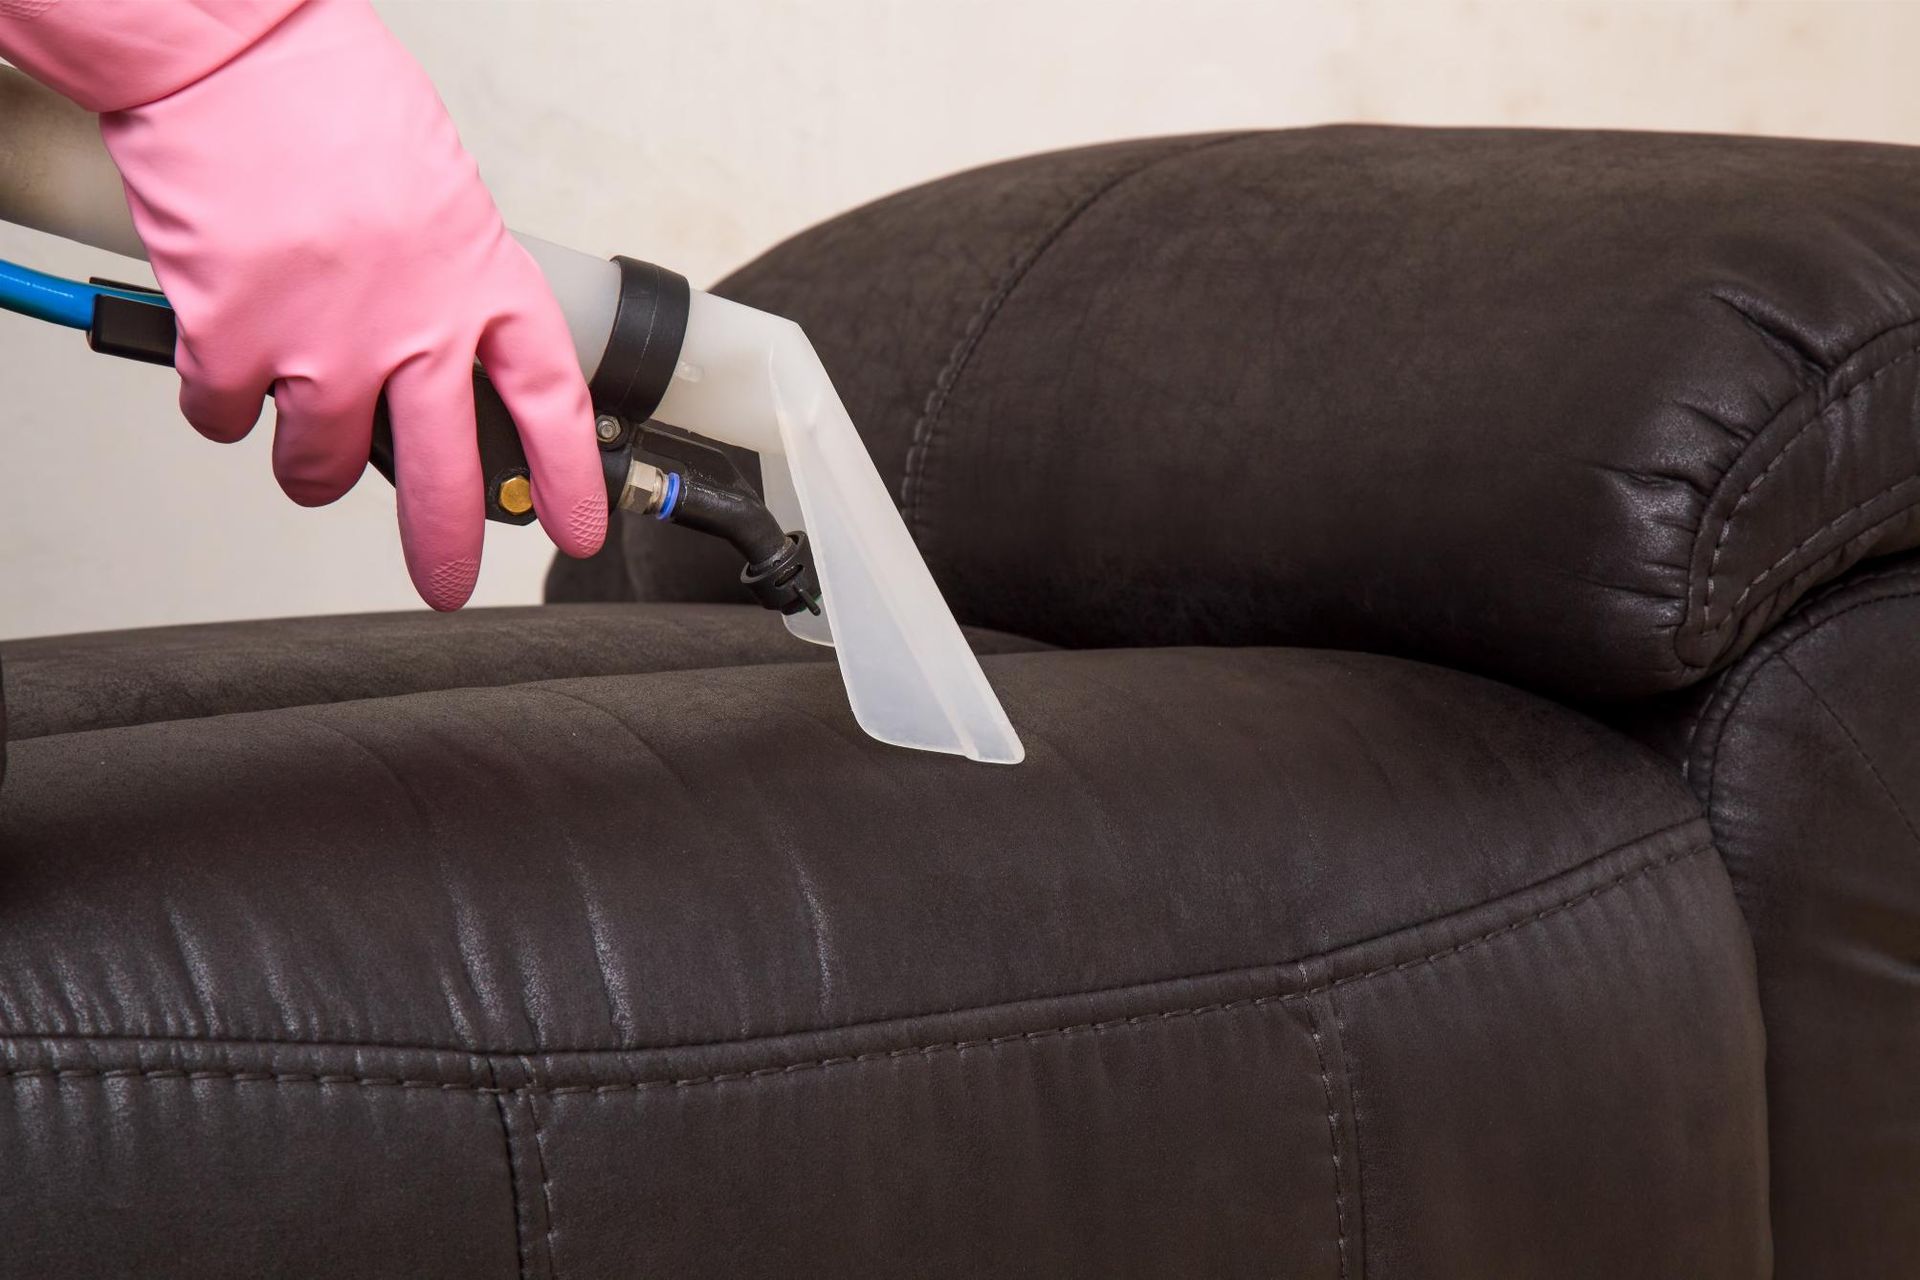 a person wearing pink gloves is cleaning a leather couch with a vacuum cleaner